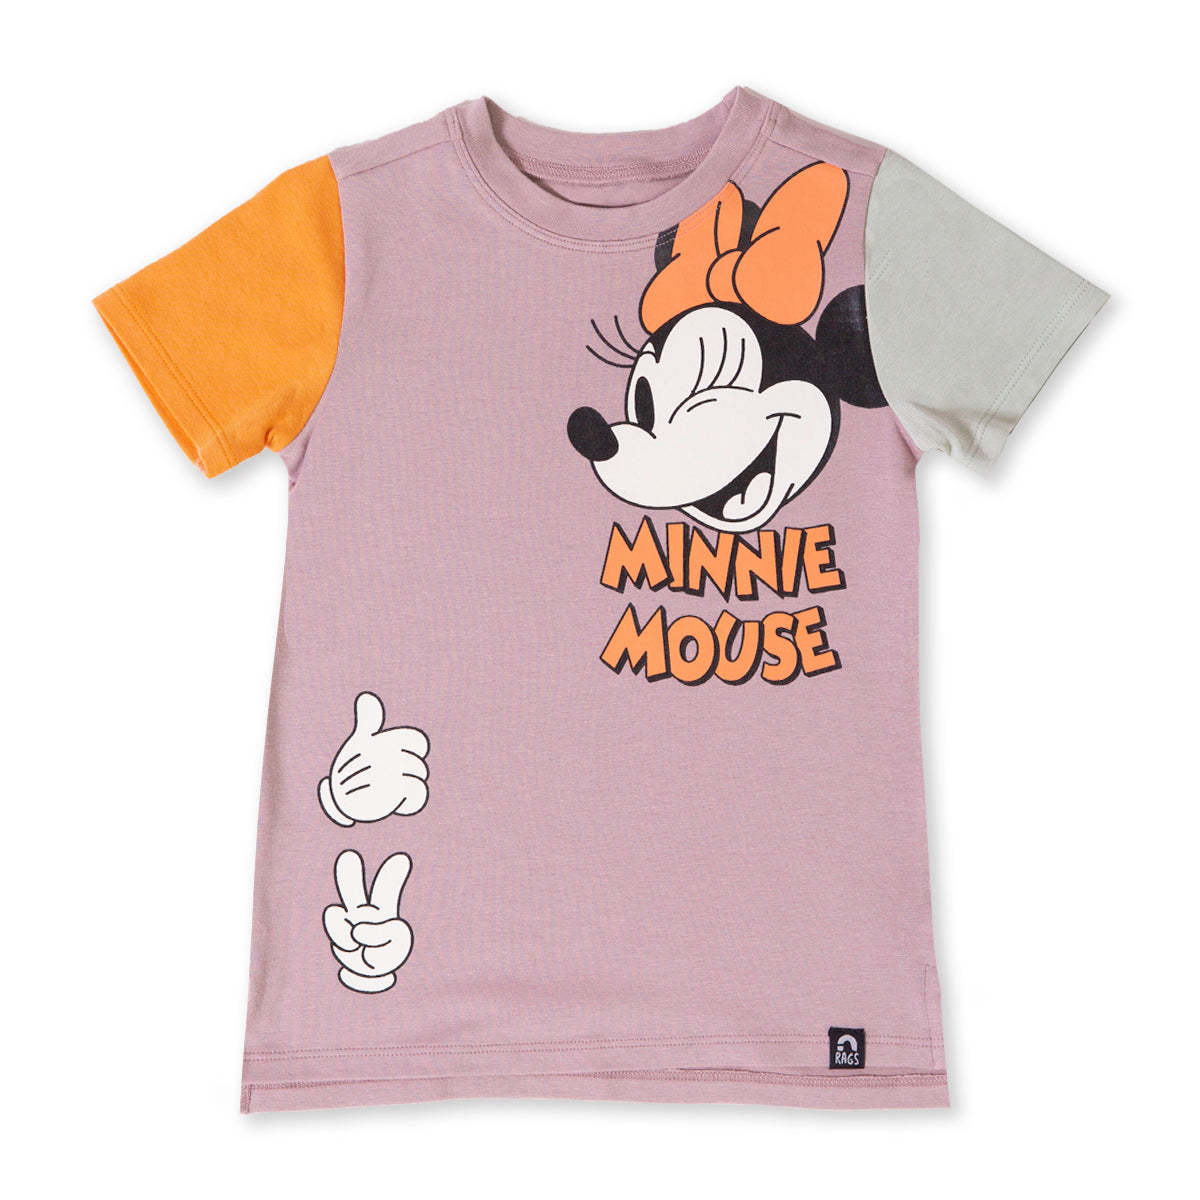 Minnie Mouse Kids Tee | Girls Disney Clothes & T-Shirts | RAGS.com